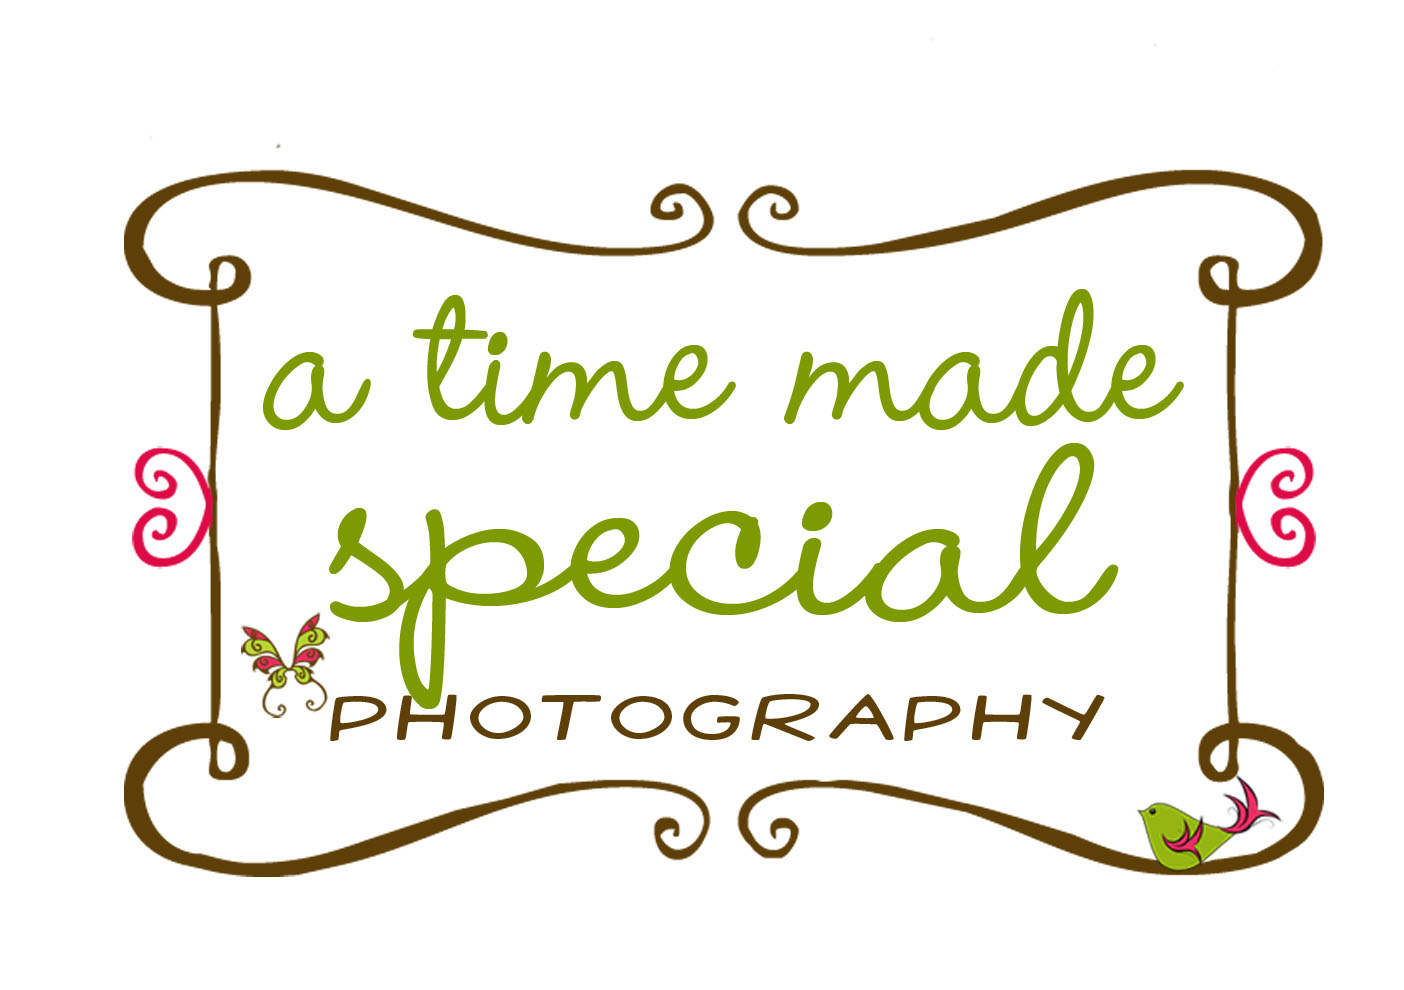 A Time Made Special Photography